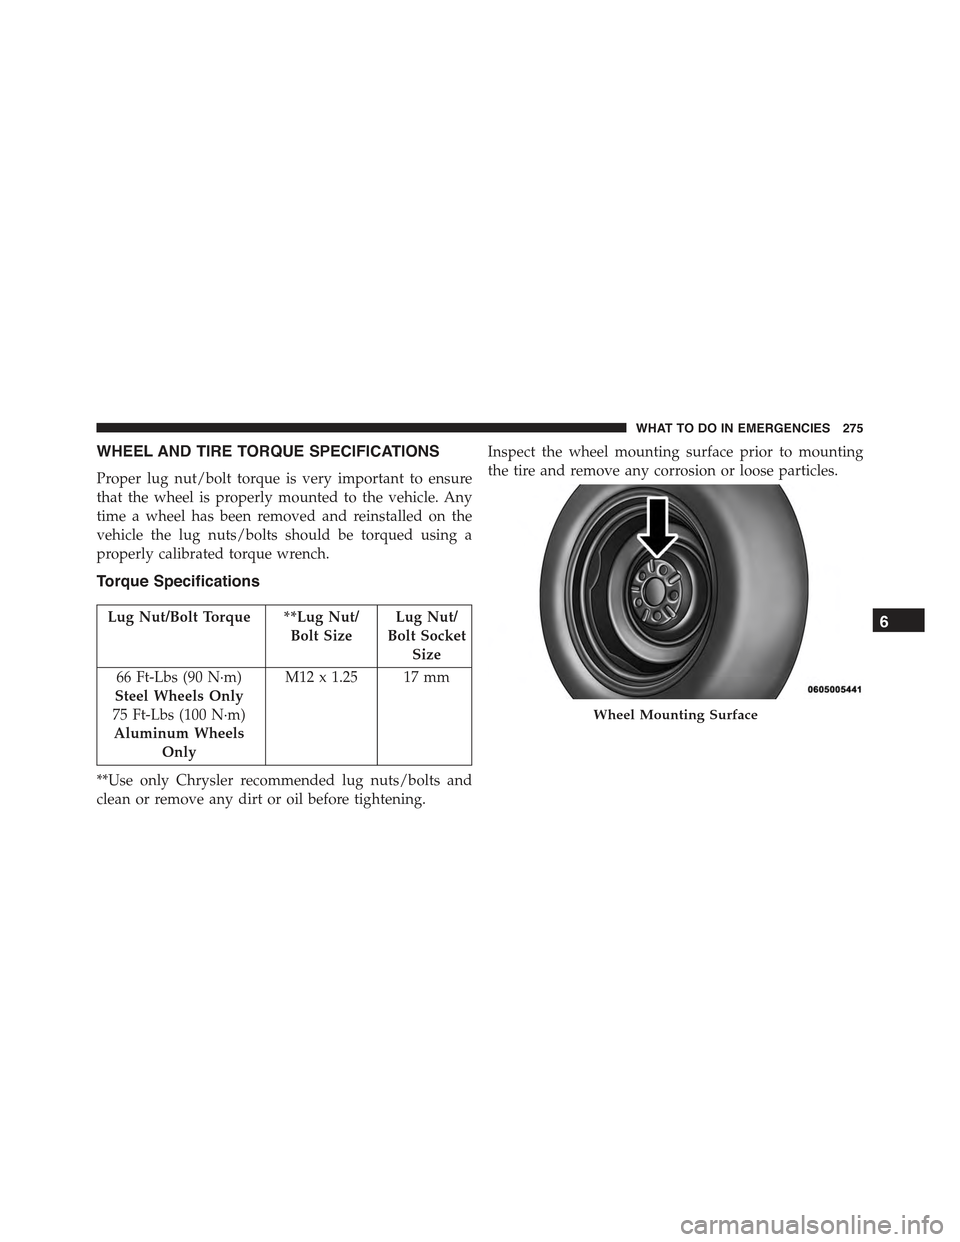 FIAT 500E 2015 2.G Owners Manual WHEEL AND TIRE TORQUE SPECIFICATIONS
Proper lug nut/bolt torque is very important to ensure
that the wheel is properly mounted to the vehicle. Any
time a wheel has been removed and reinstalled on the
